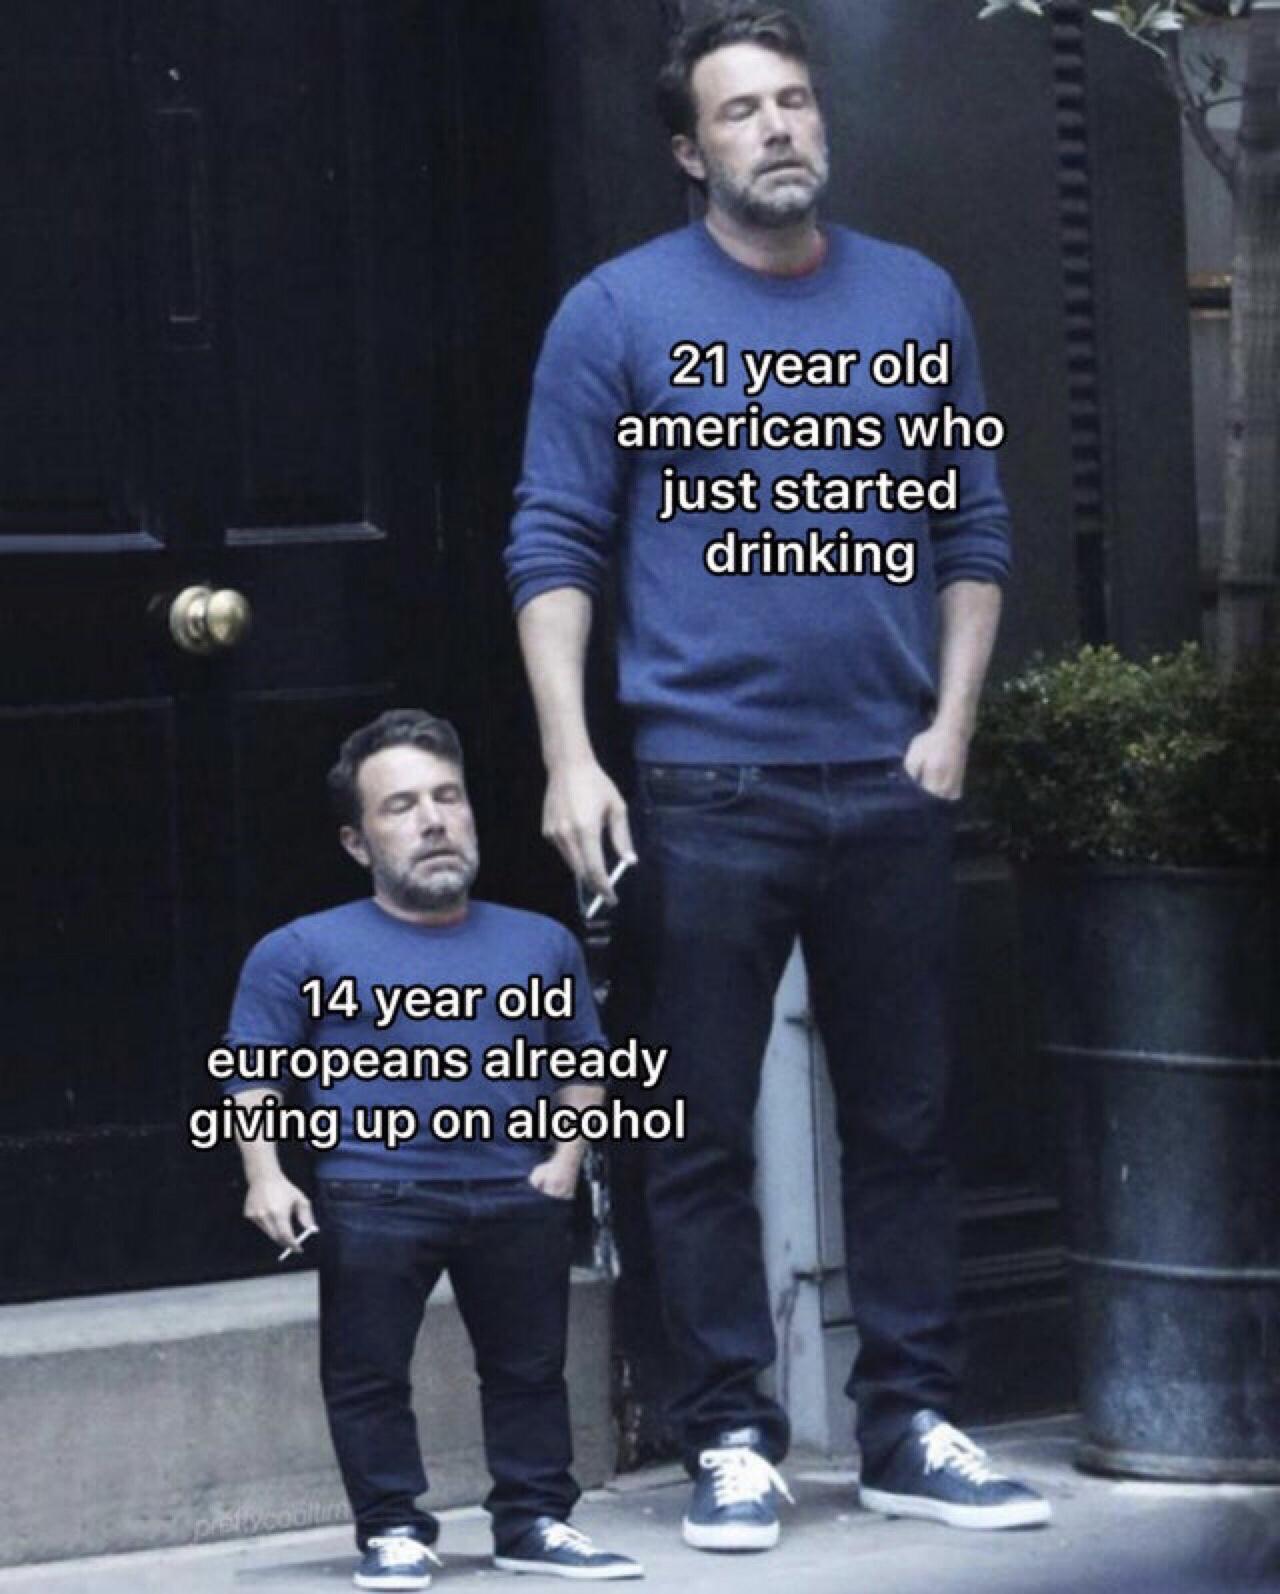 funny gaming memes - mini ben affleck meme - 21 year old americans who just started drinking 14 year old europeans already giving up on alcohol pret coolin